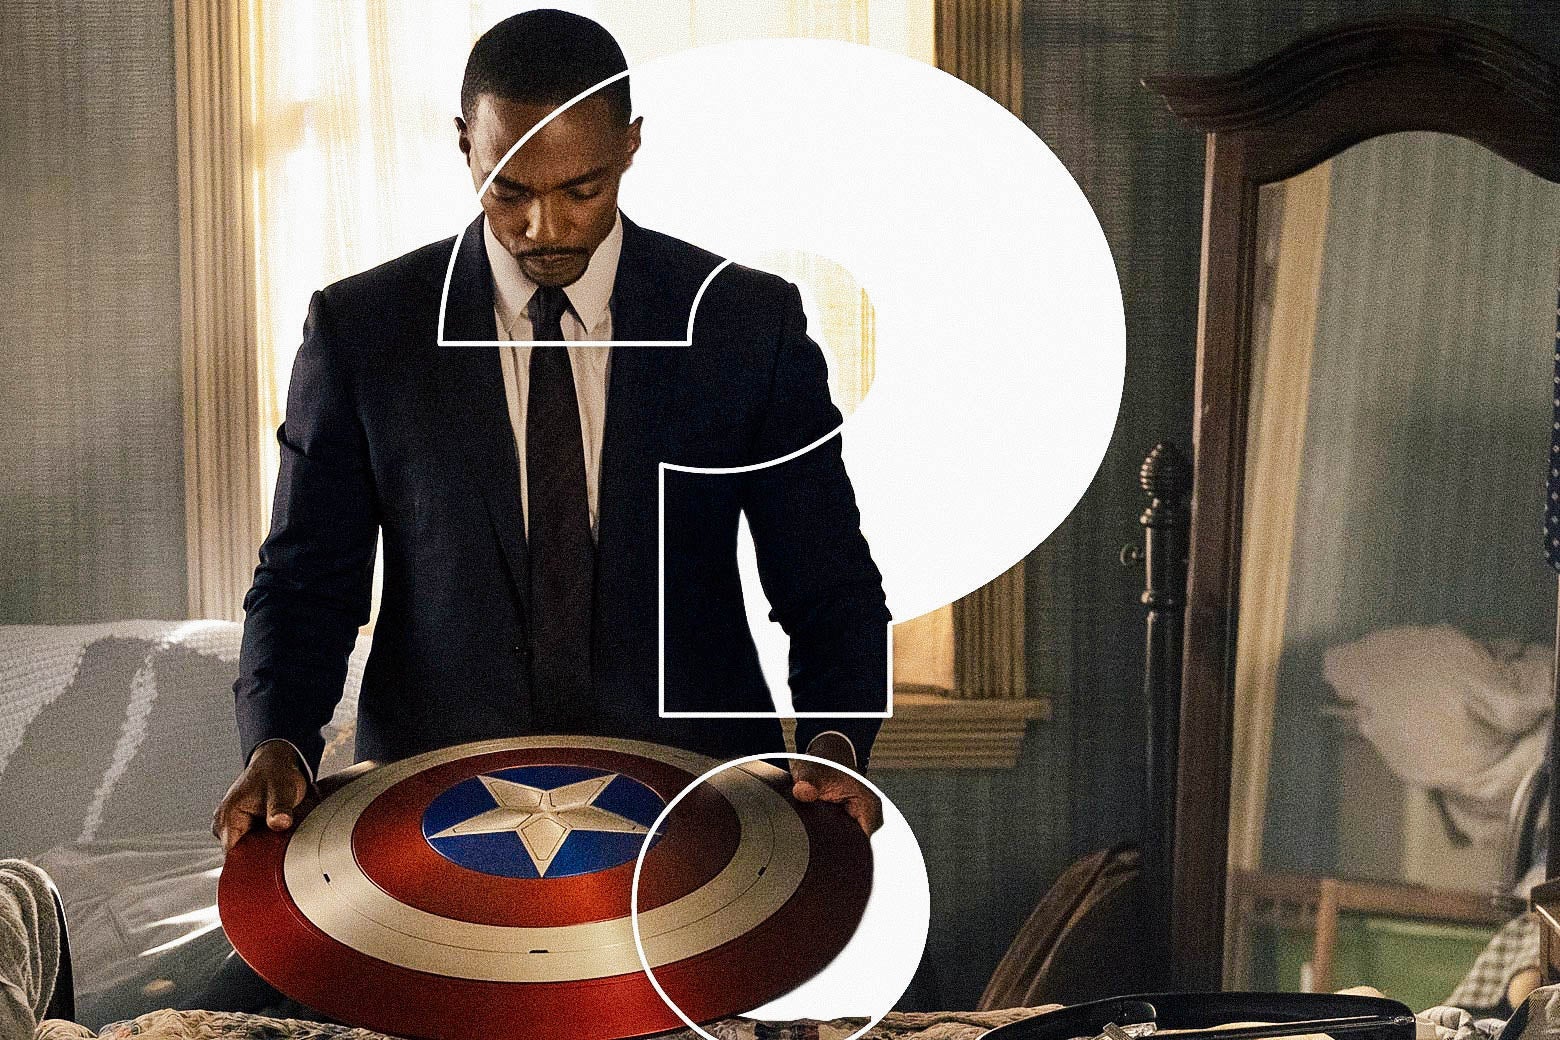 He wears a dark suit (not the super kind) and stares down solemnly at Captain America’s shield.